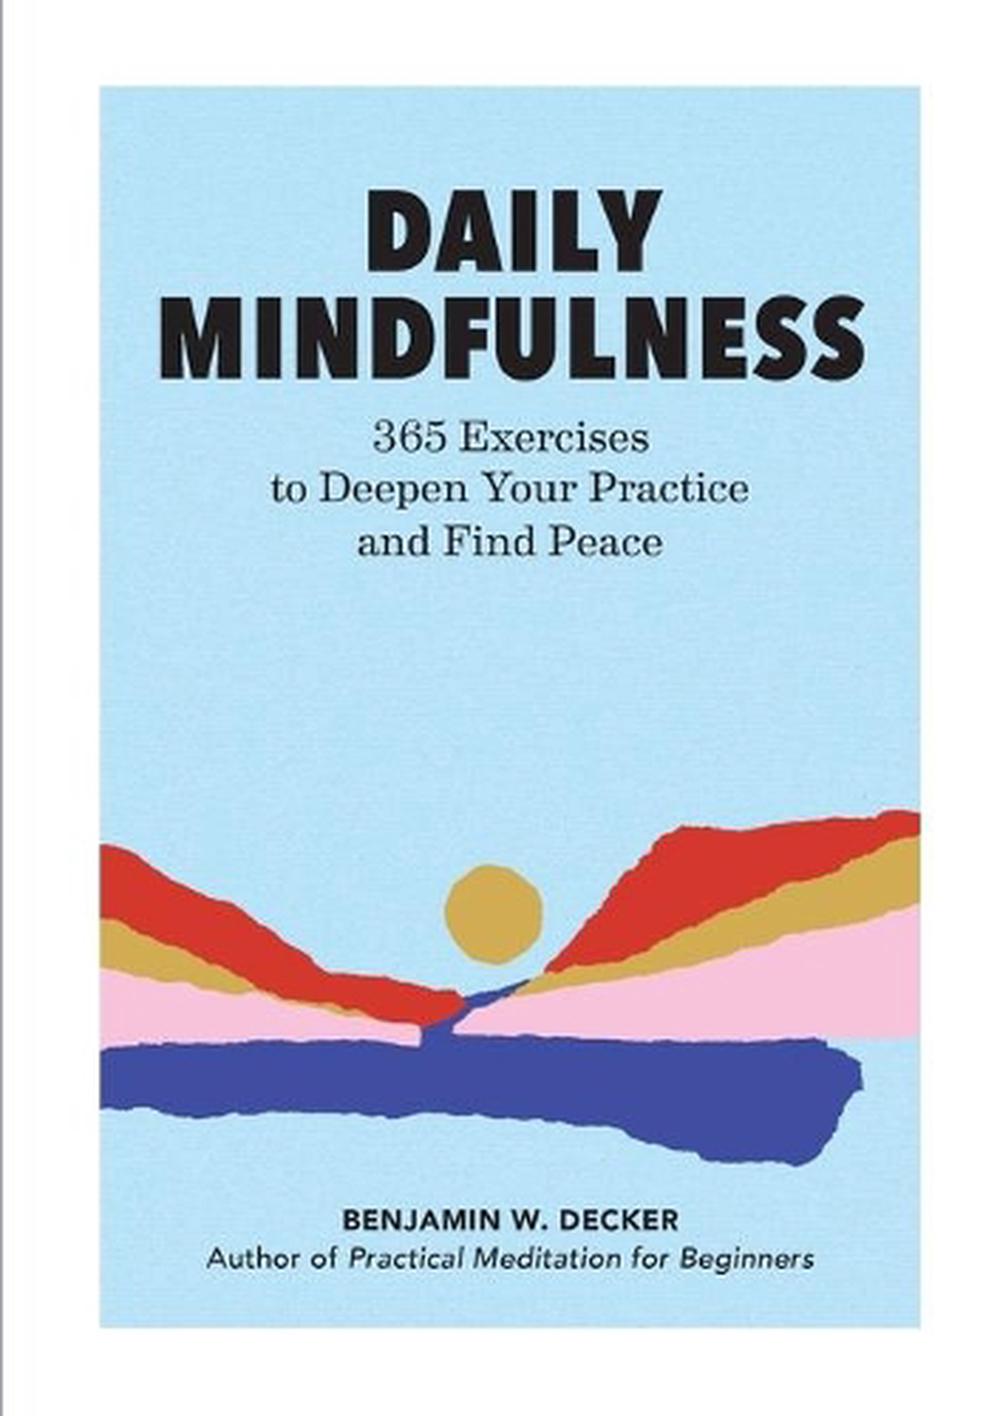 Daily Mindfulness: 365 Exercises to Deepen Your Practice and Find Peace ...